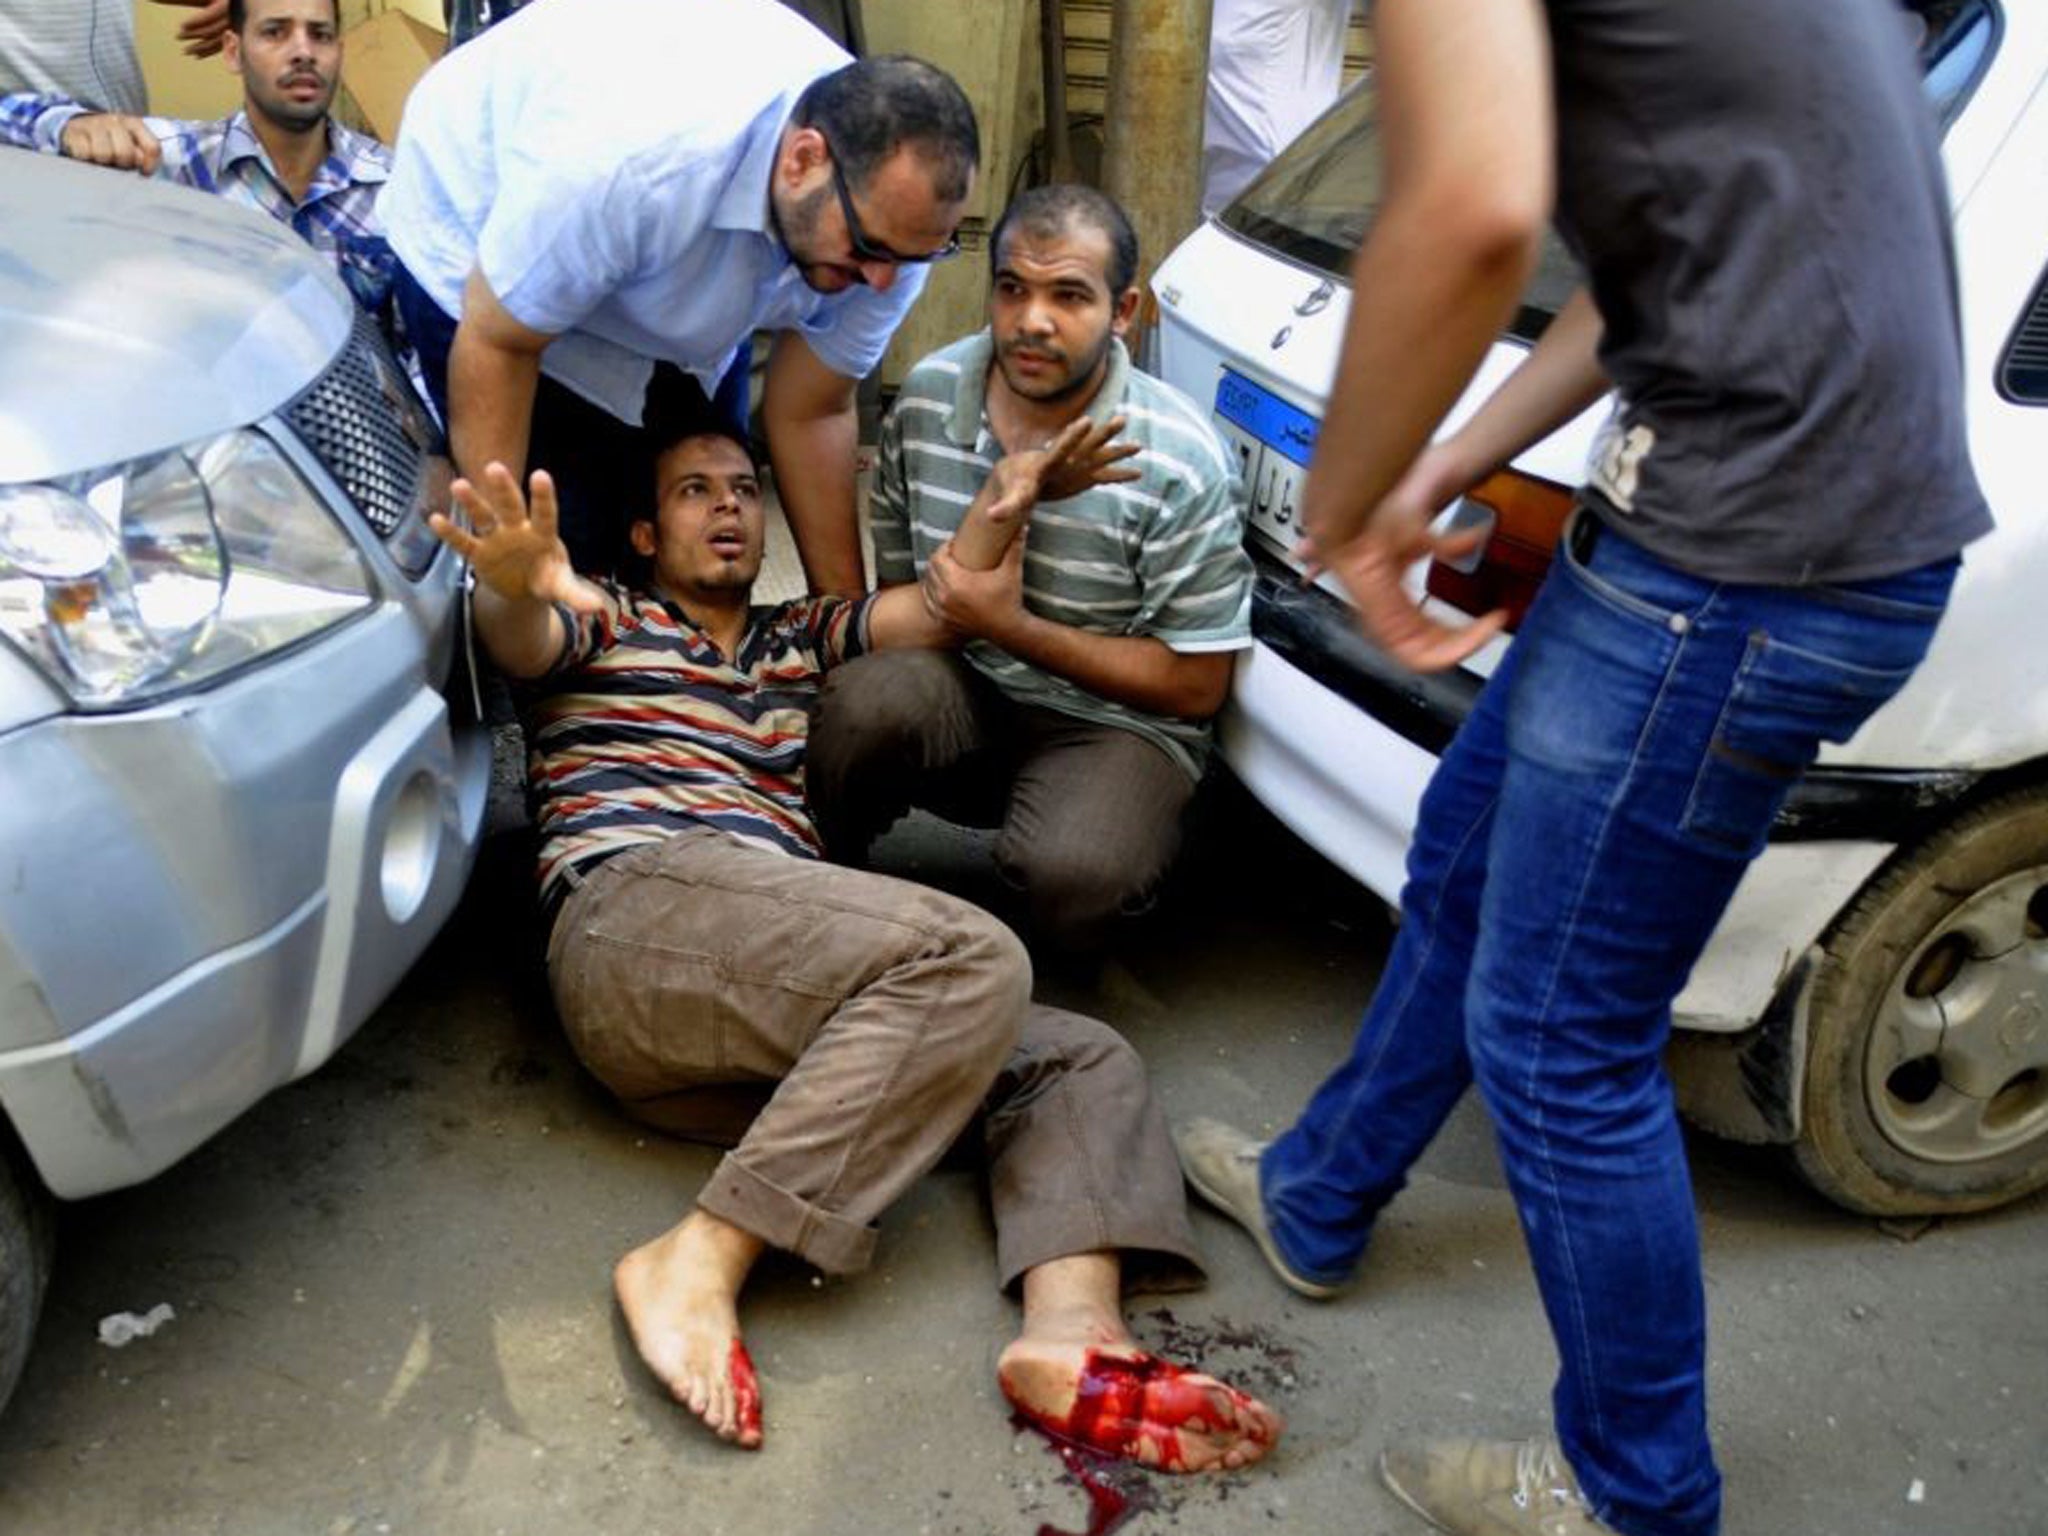 An Egyptian protester lies wounded after a Muslim Brotherhood protest approached a church protected by the army in Giza, Egypt on 16 August 2013